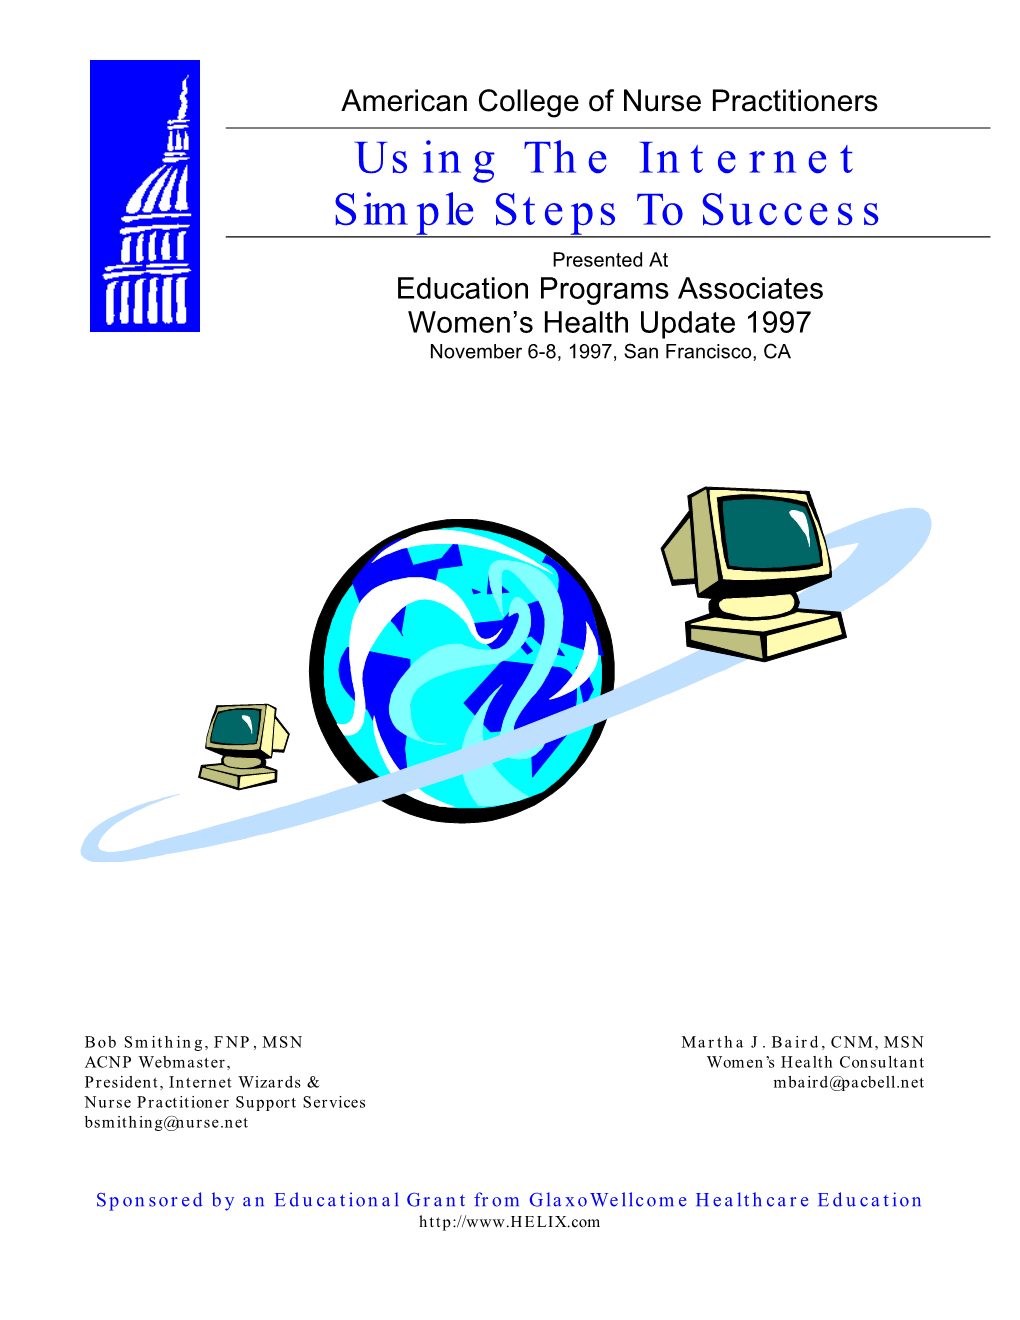 The Internet Simple Steps to Success Presented at Education Programs Associates Women’S Health Update 1997 November 6-8, 1997, San Francisco, CA